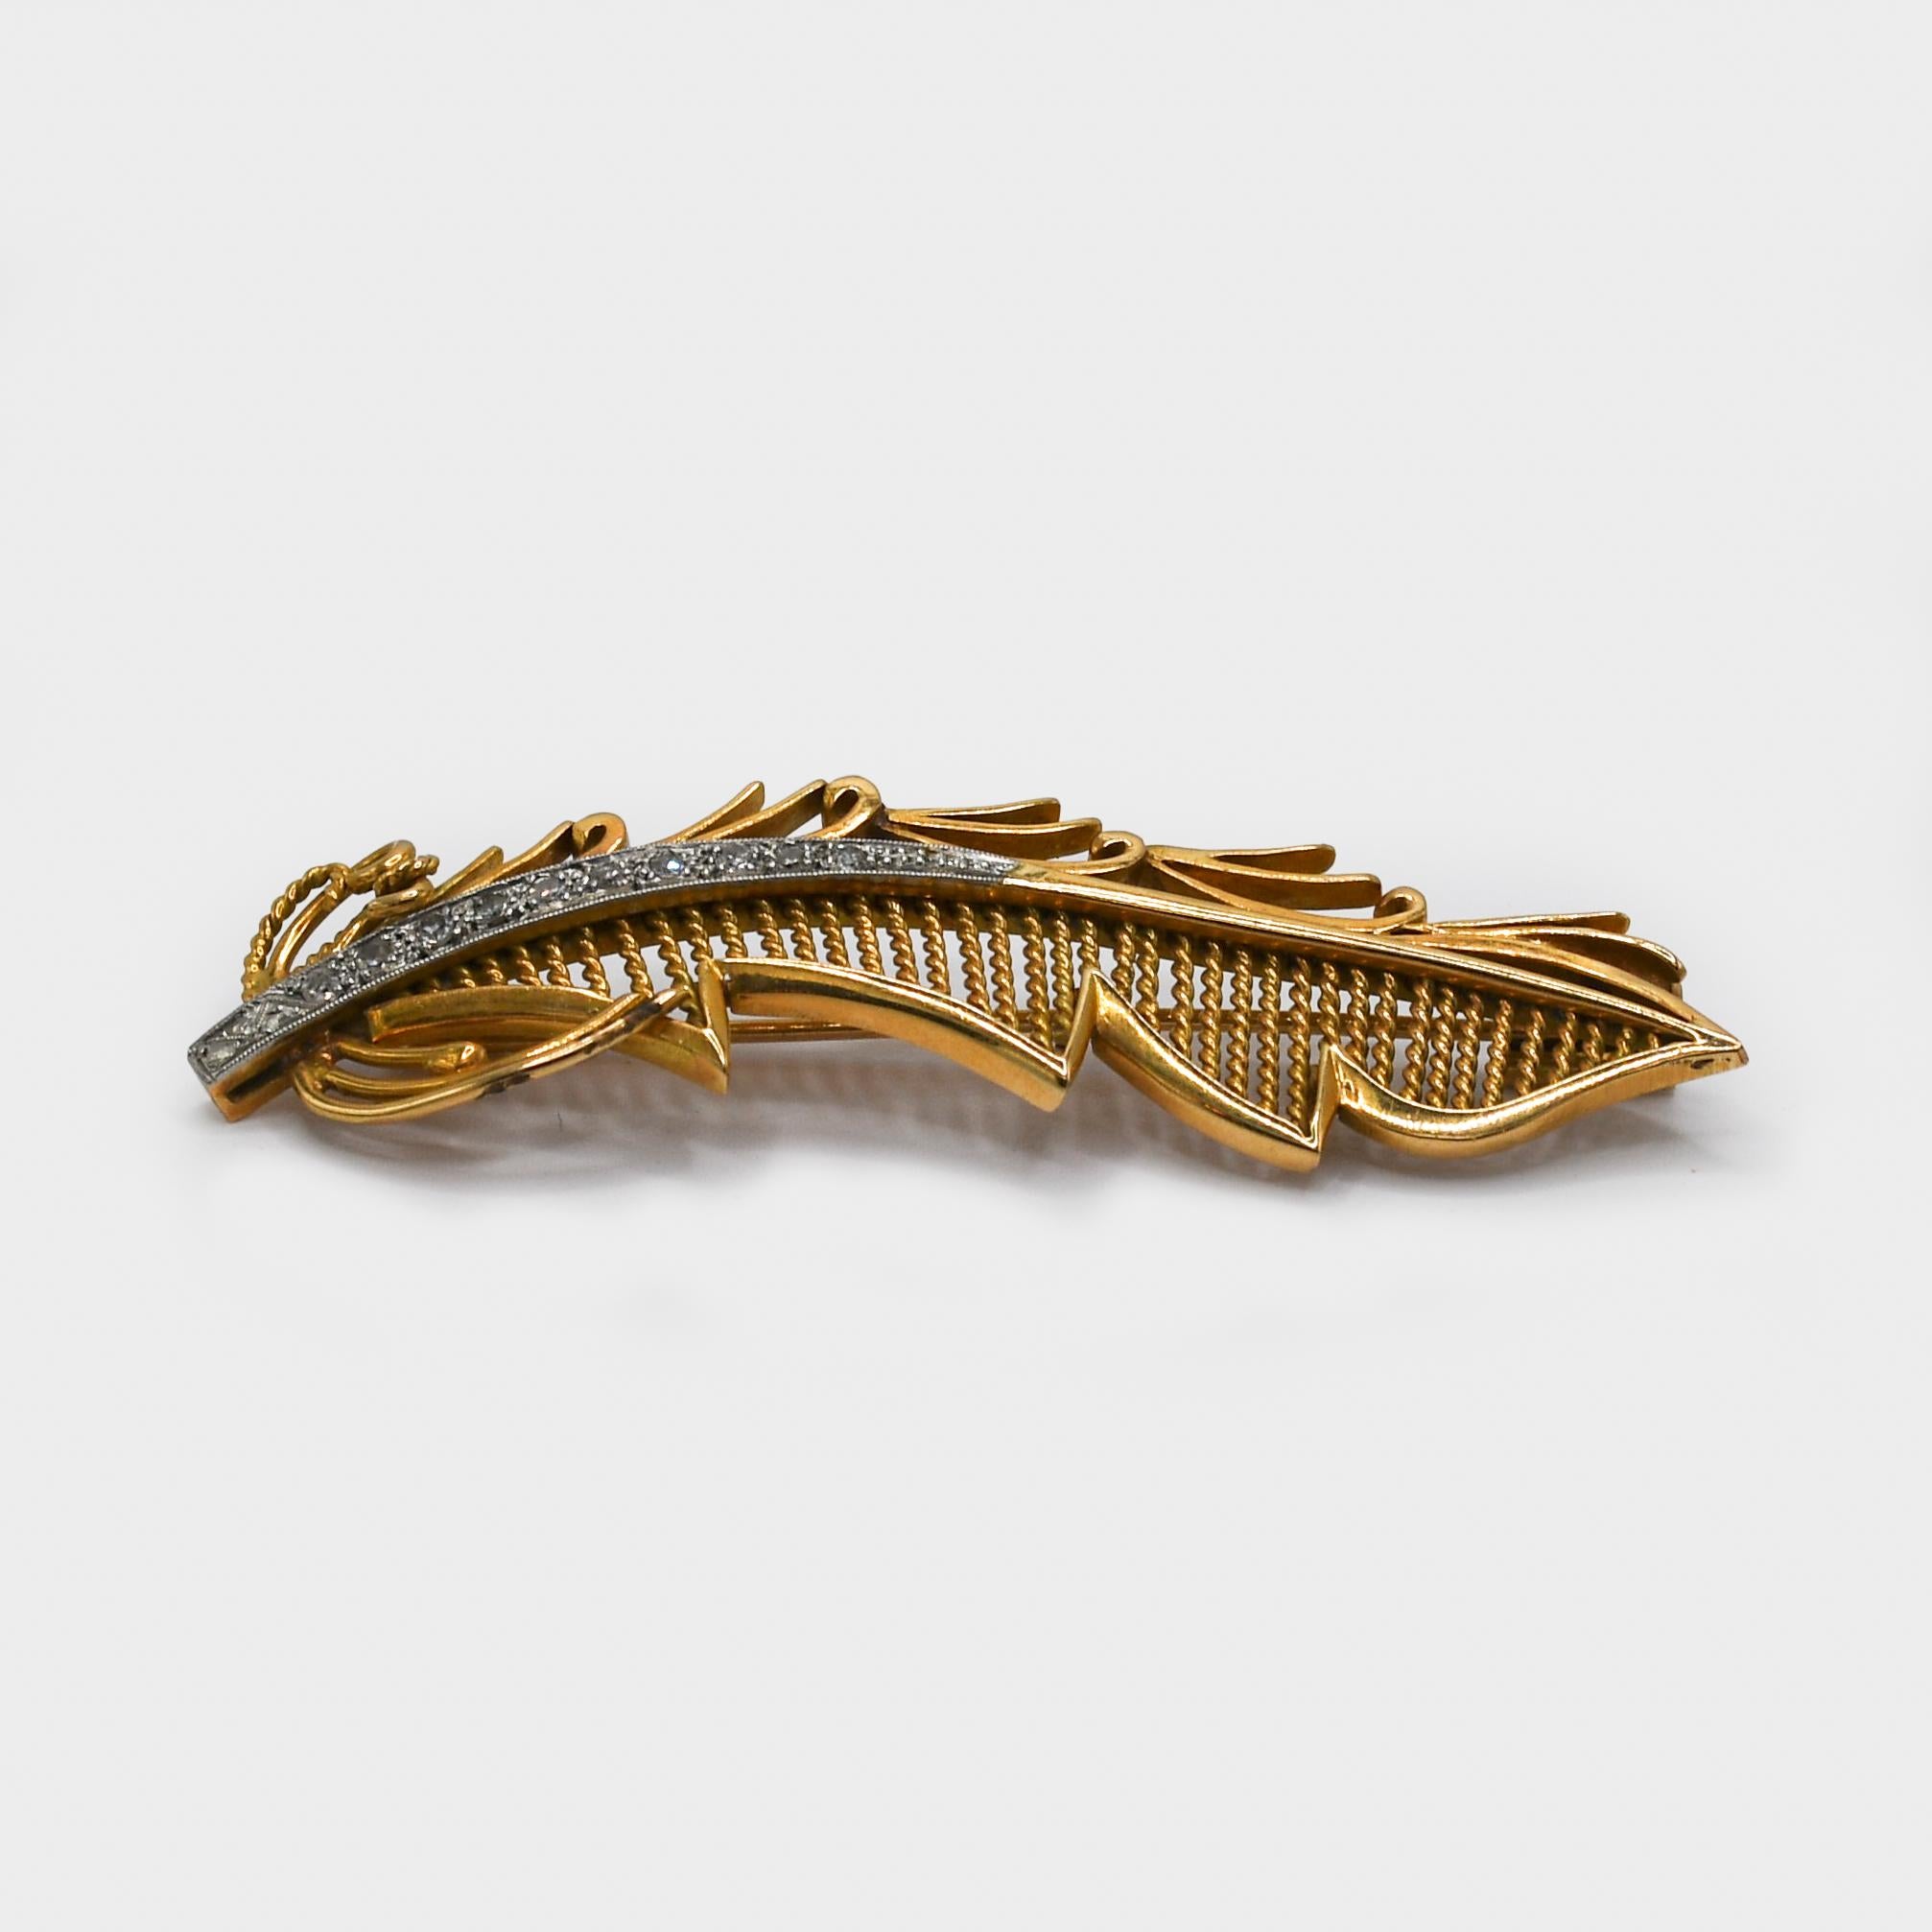 18K Yellow Gold Vintage Diamond Brooch 15.6gr
18k yellow gold vintage diamond brooch. 
The brooch is a leaf design, set with a row of small single cut diamonds.
0.15tdw.
Weighs 15.6gr, not stamped but tests strong 18k 
2 1/2